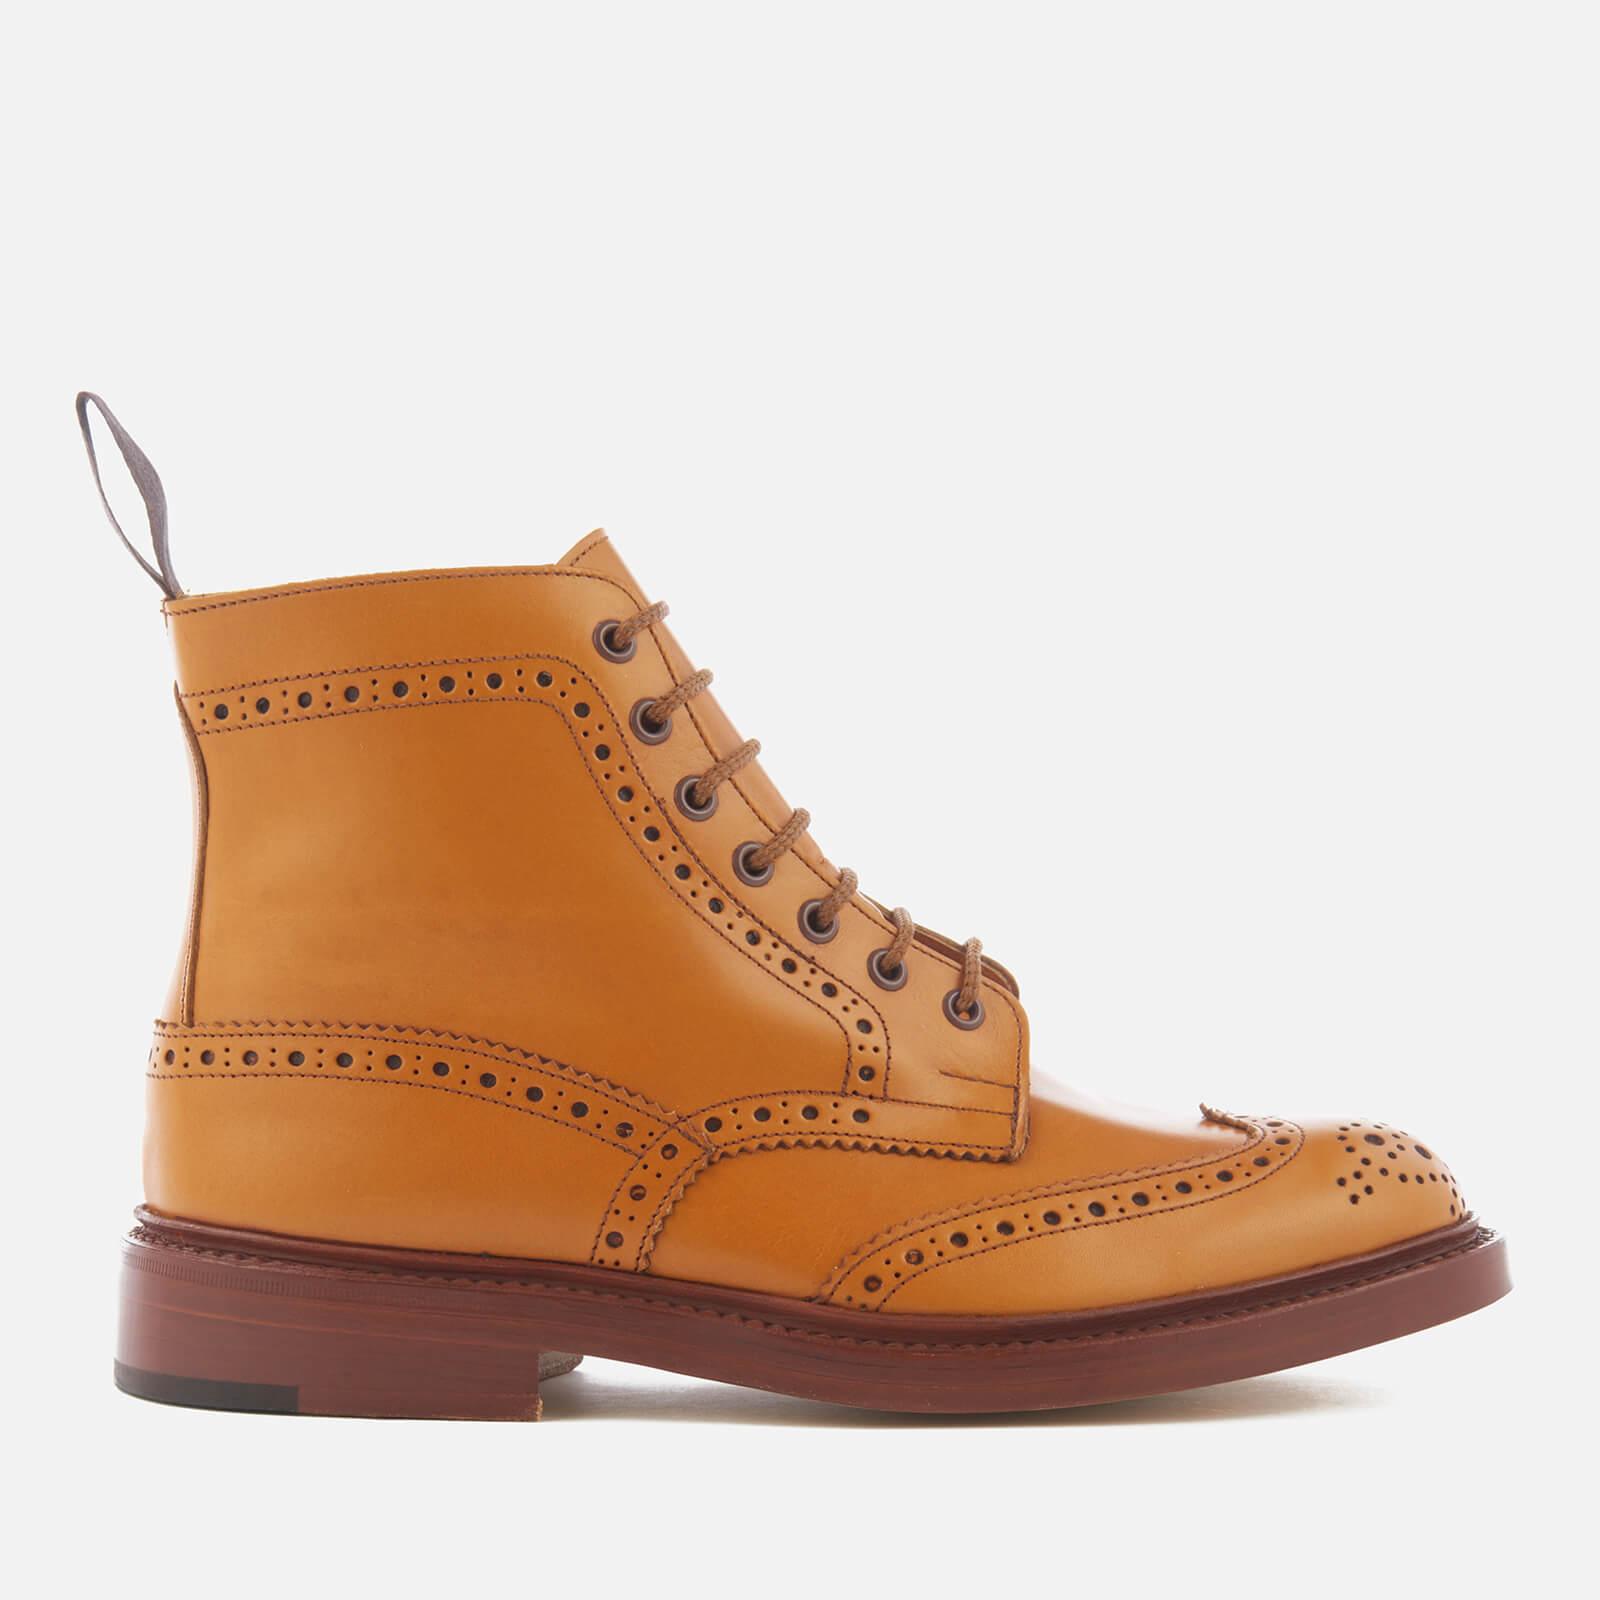 Tricker's Stow Leather Brogue Lace Up Boots in Tan (Brown) for Men - Lyst